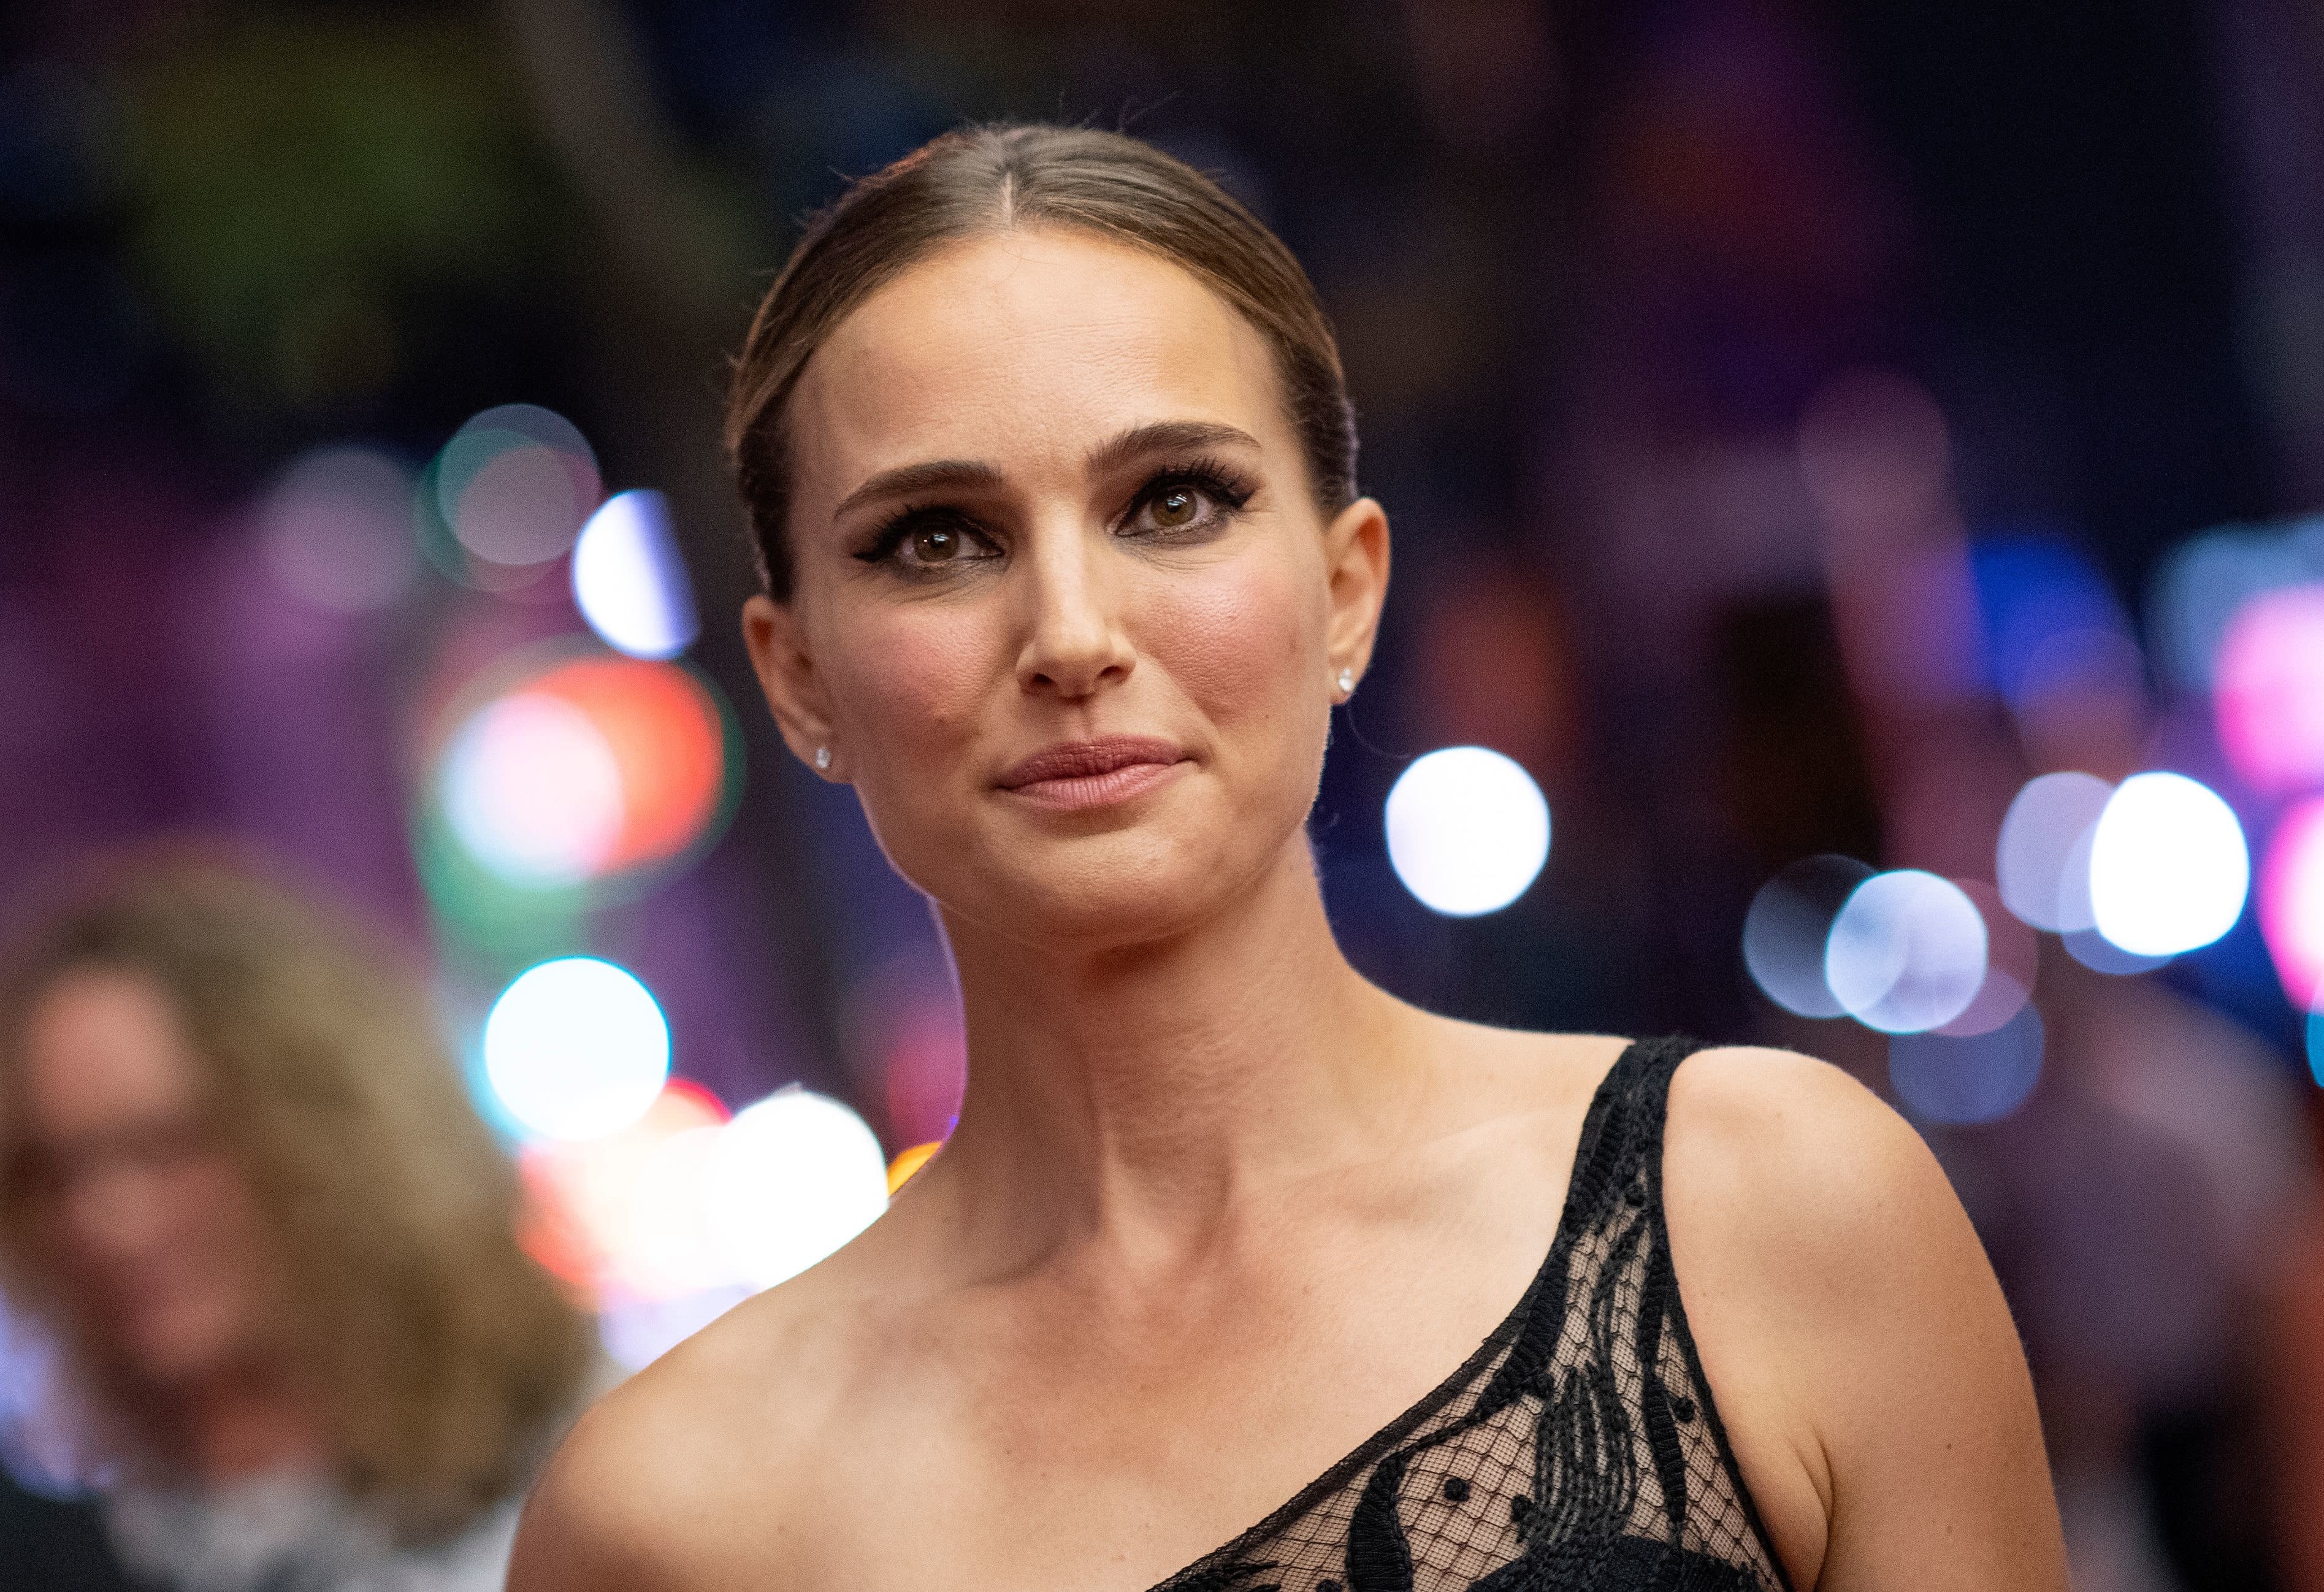 Natalie Portman Wore The Most Sophisticated Naked Dress To Her Film